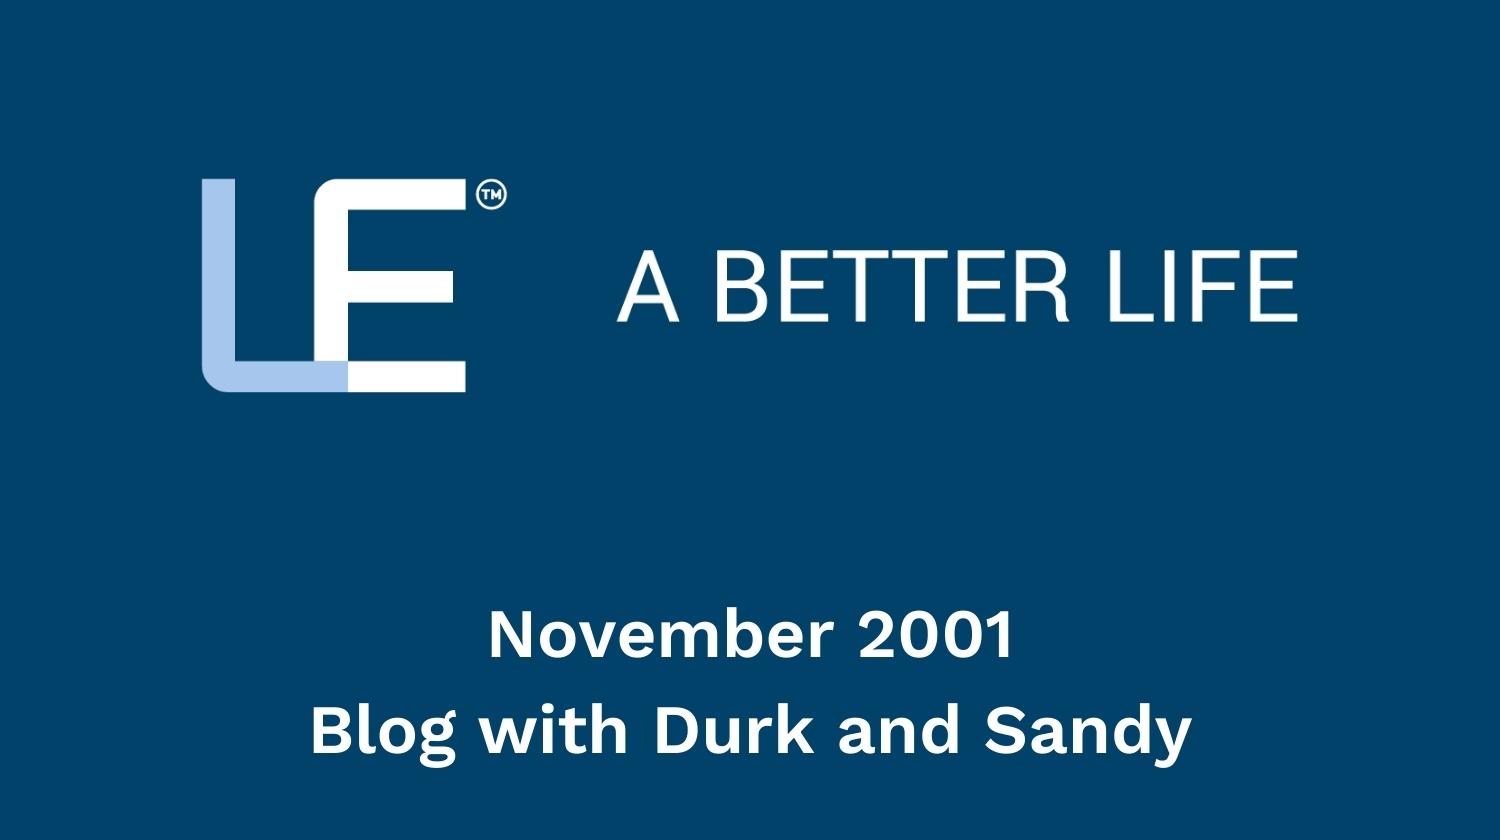 November 2001 Blog with Durk and Sandy